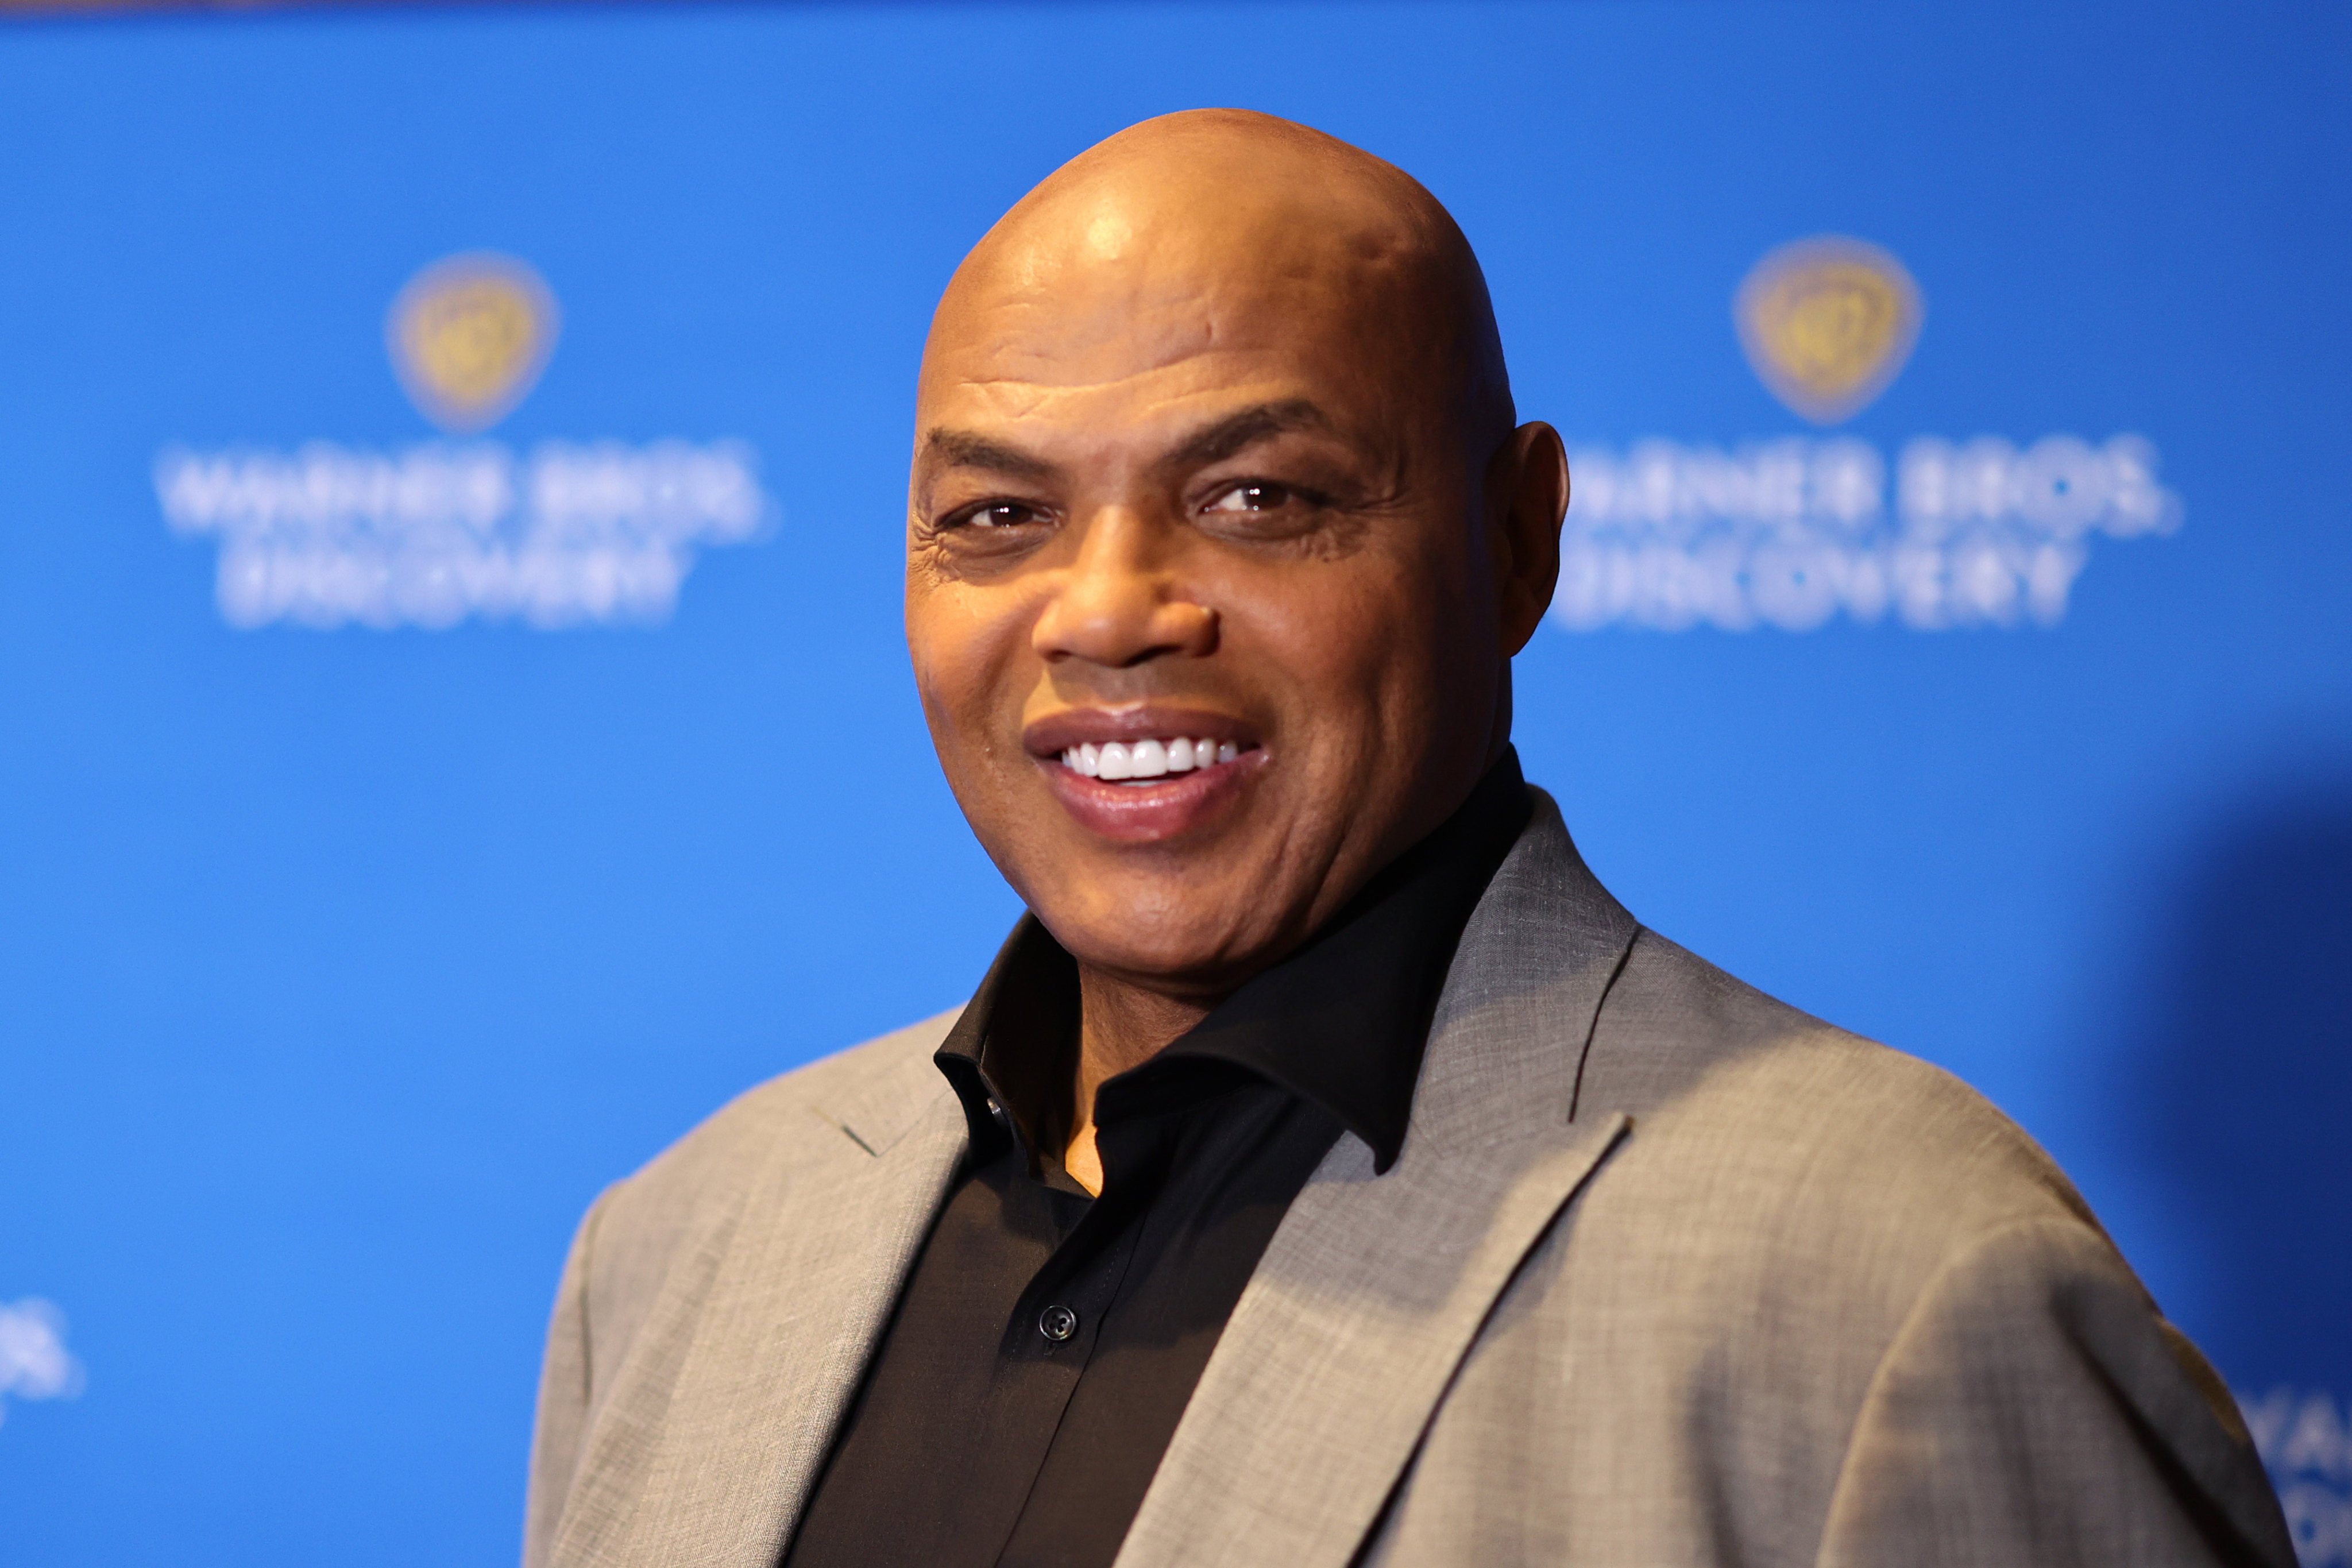 Charles Barkley has announced that “next year is going to be my last year on television”. Photo: Getty Images